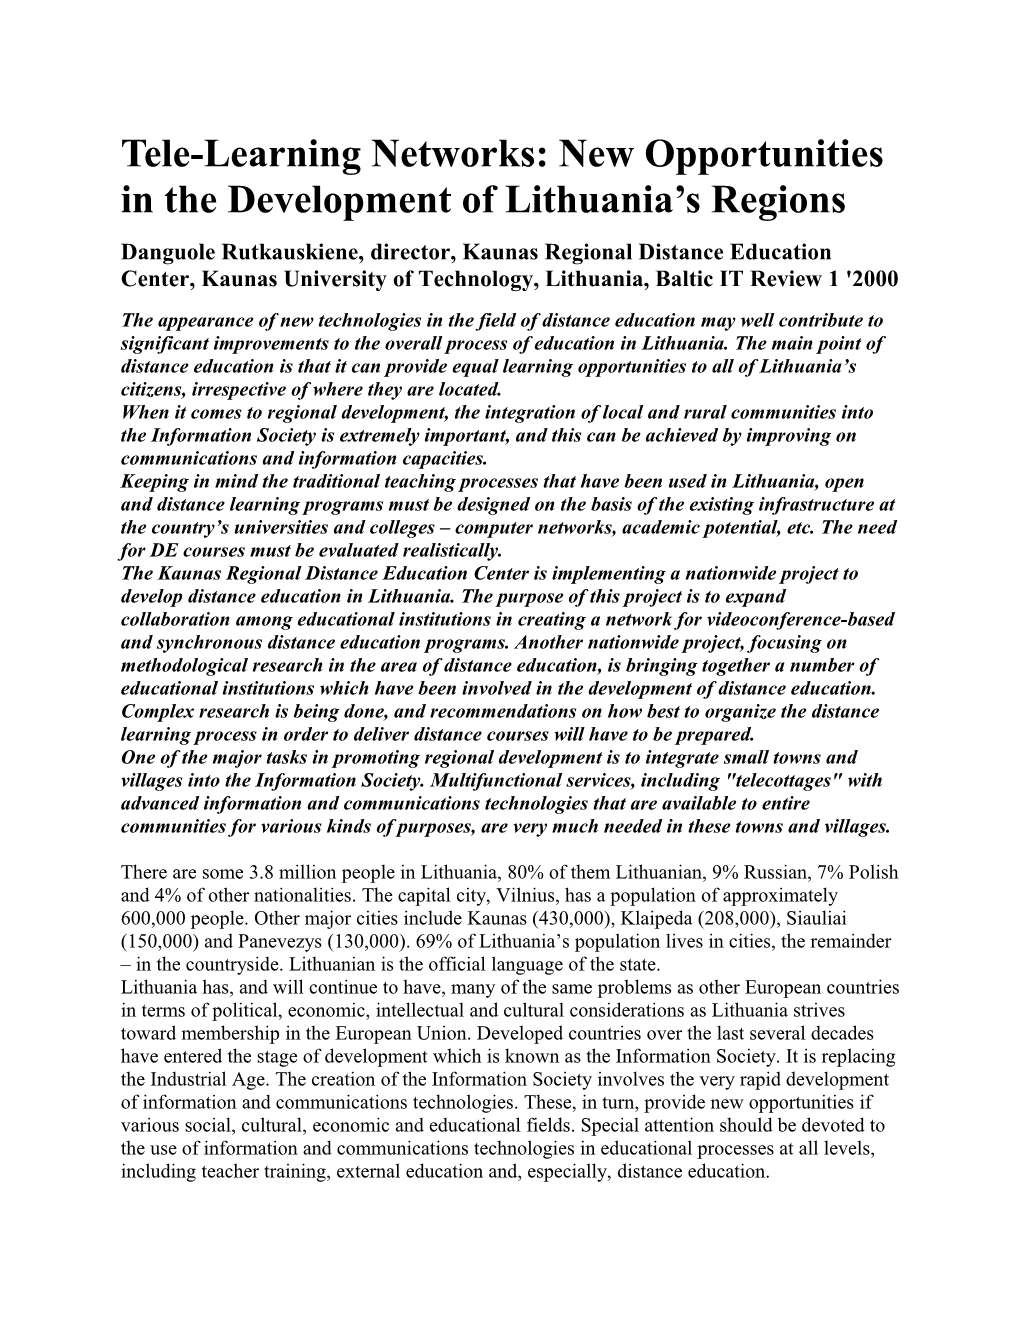 Tele-Learning Networks: New Opportunities in the Development of Lithuania S Regions